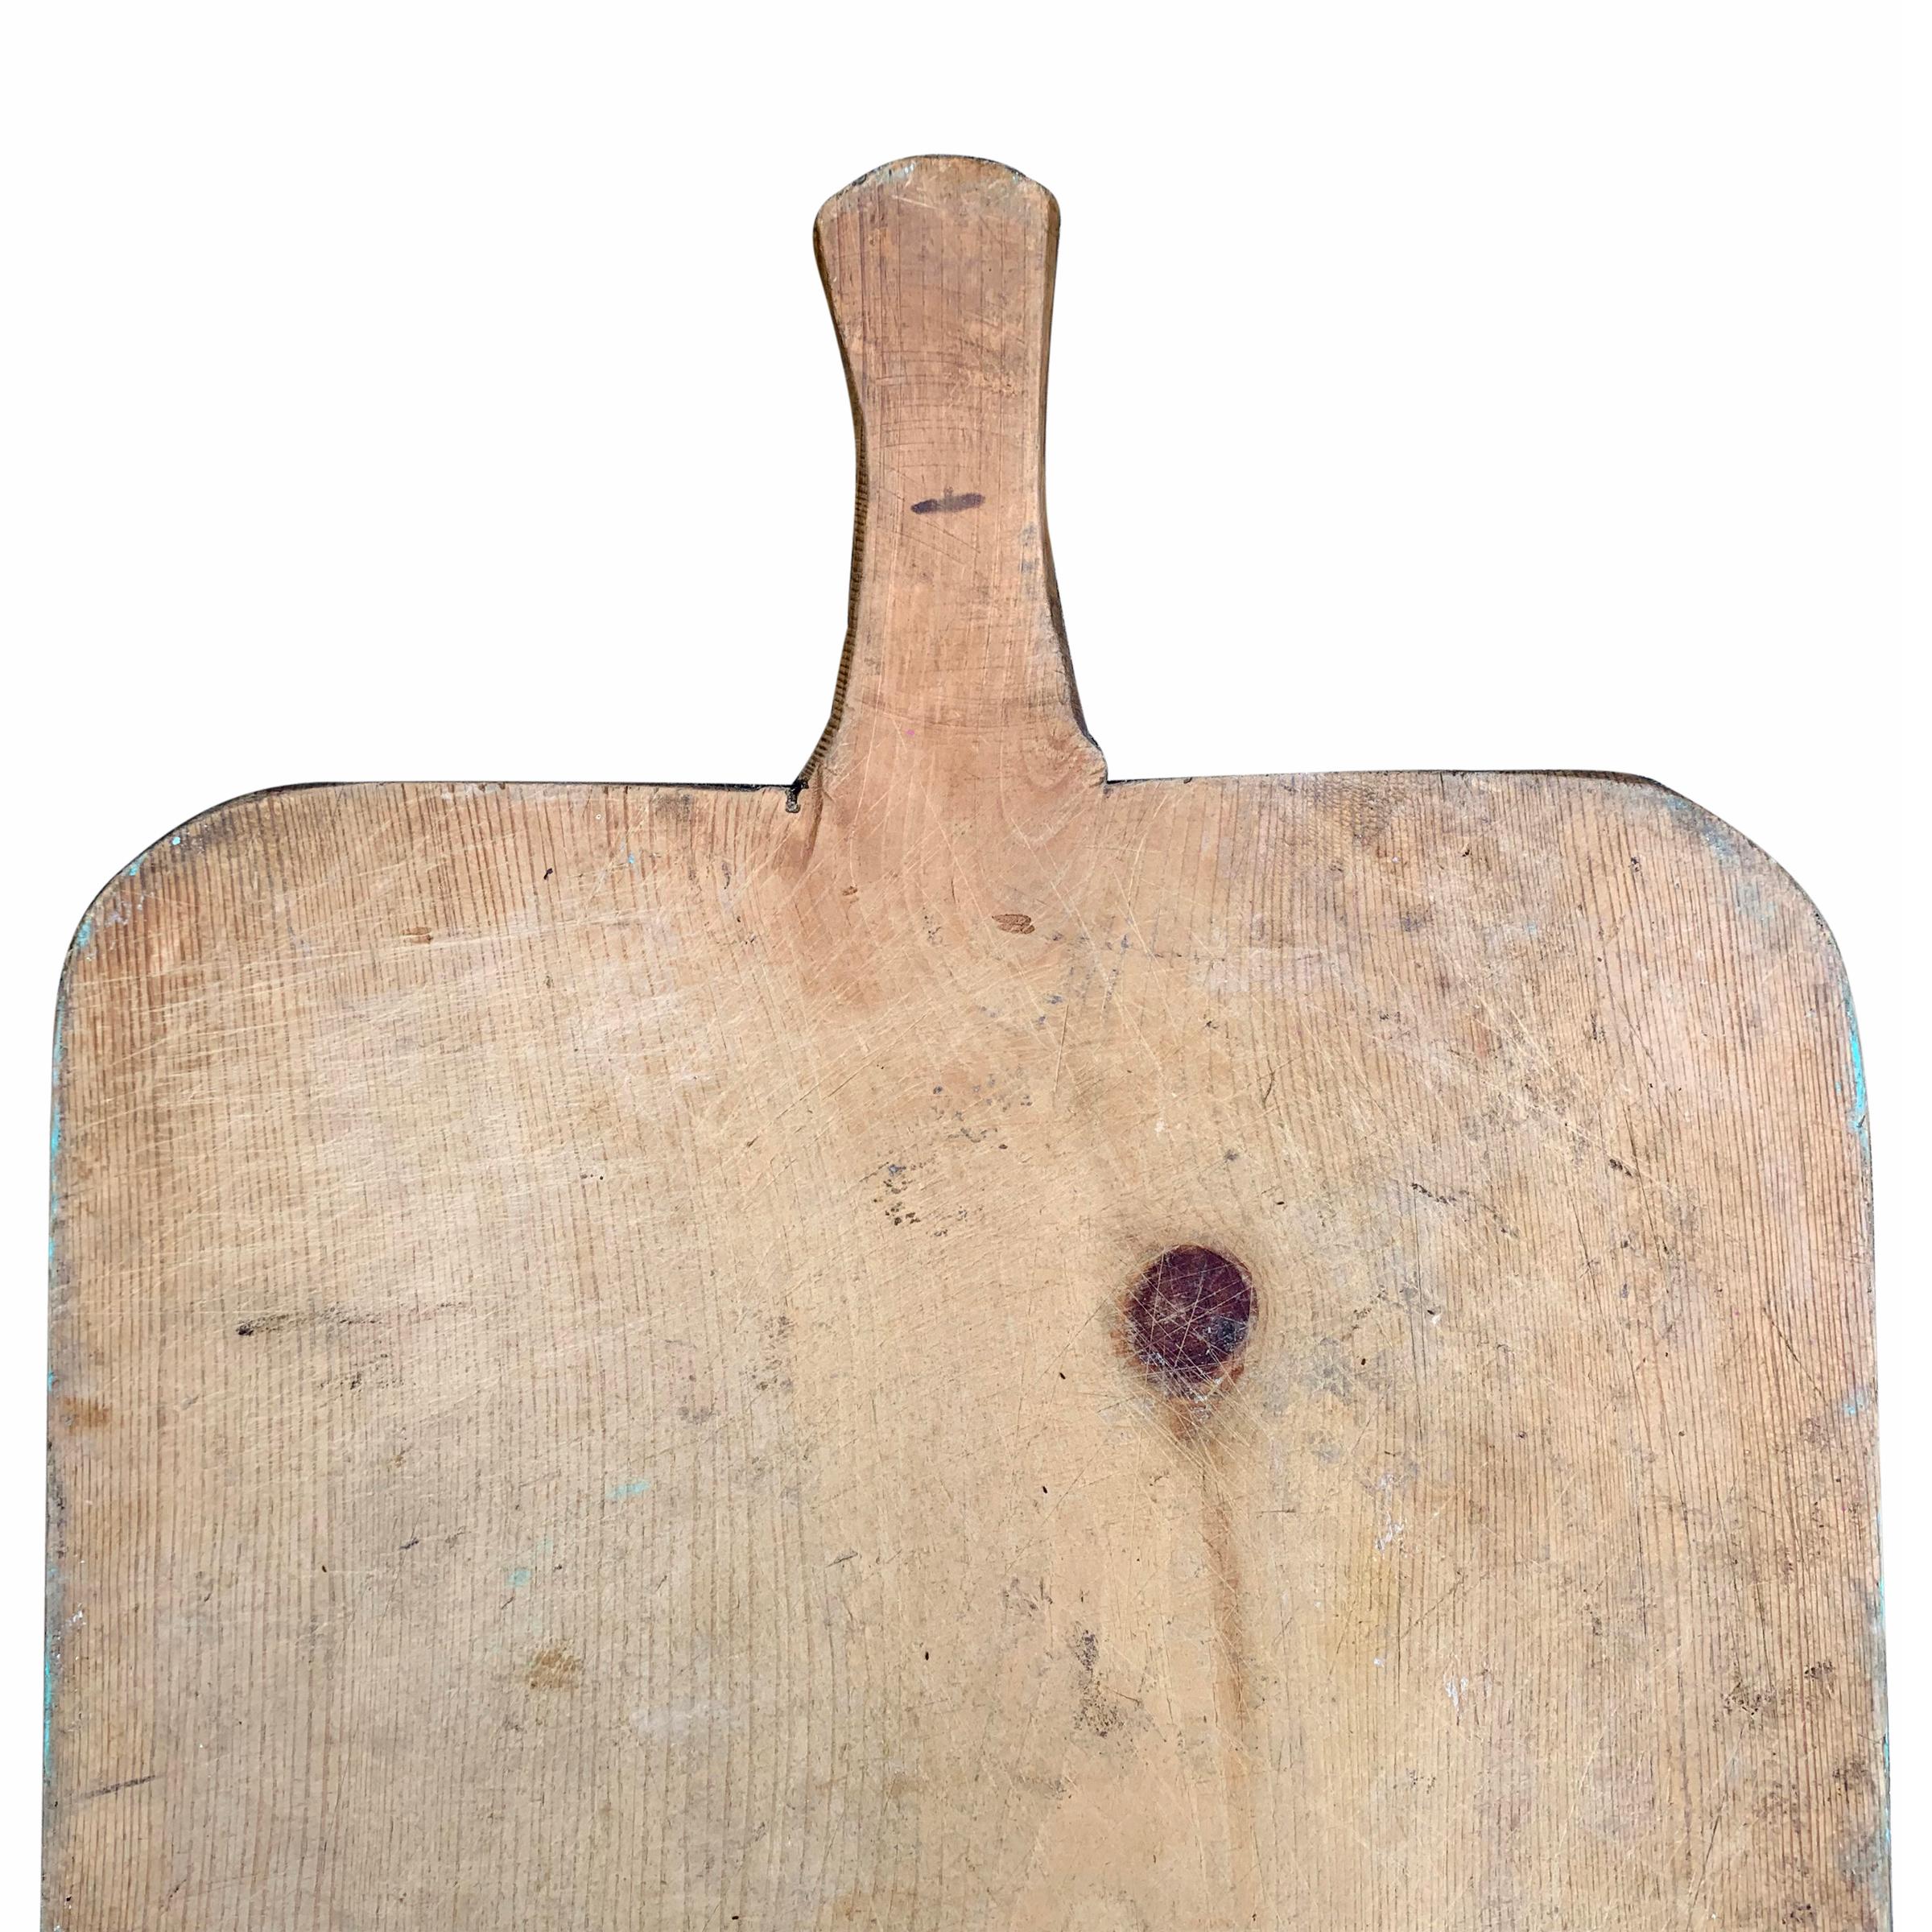 A wonderfully worn early 20th century Italian pine peel used in the bread baking process, with a beautiful patina. All that’s missing is a selection of cheeses, prosciutto, and your guests. Also perfect for use as a chopping block.